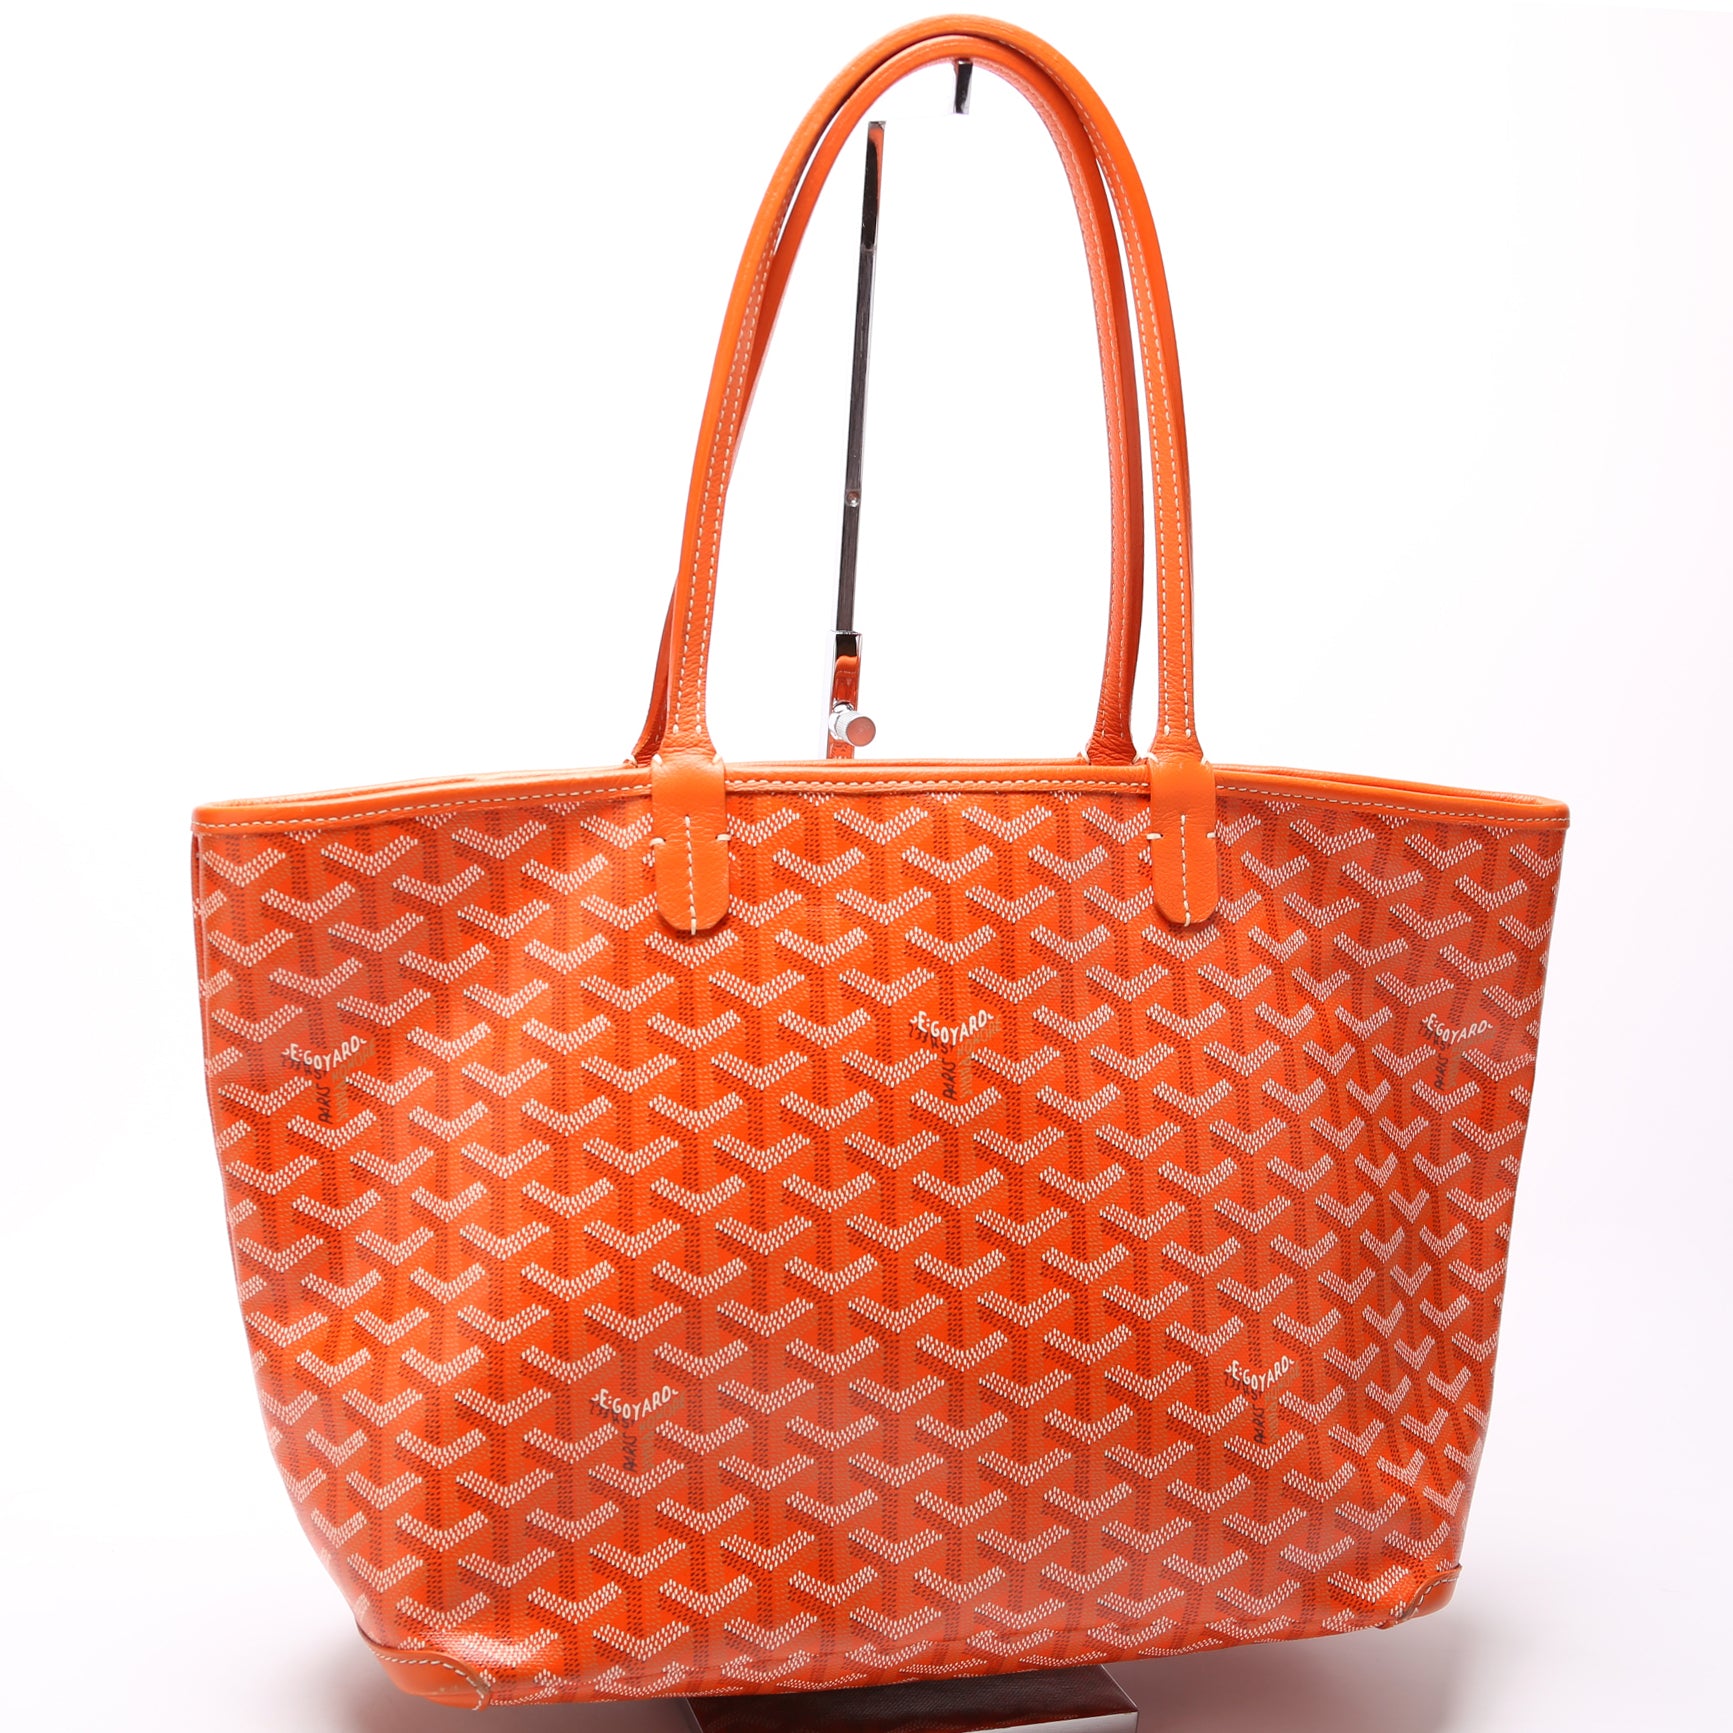 Does anyone own a goyard tote (st Louis or the artois)? Thoughts